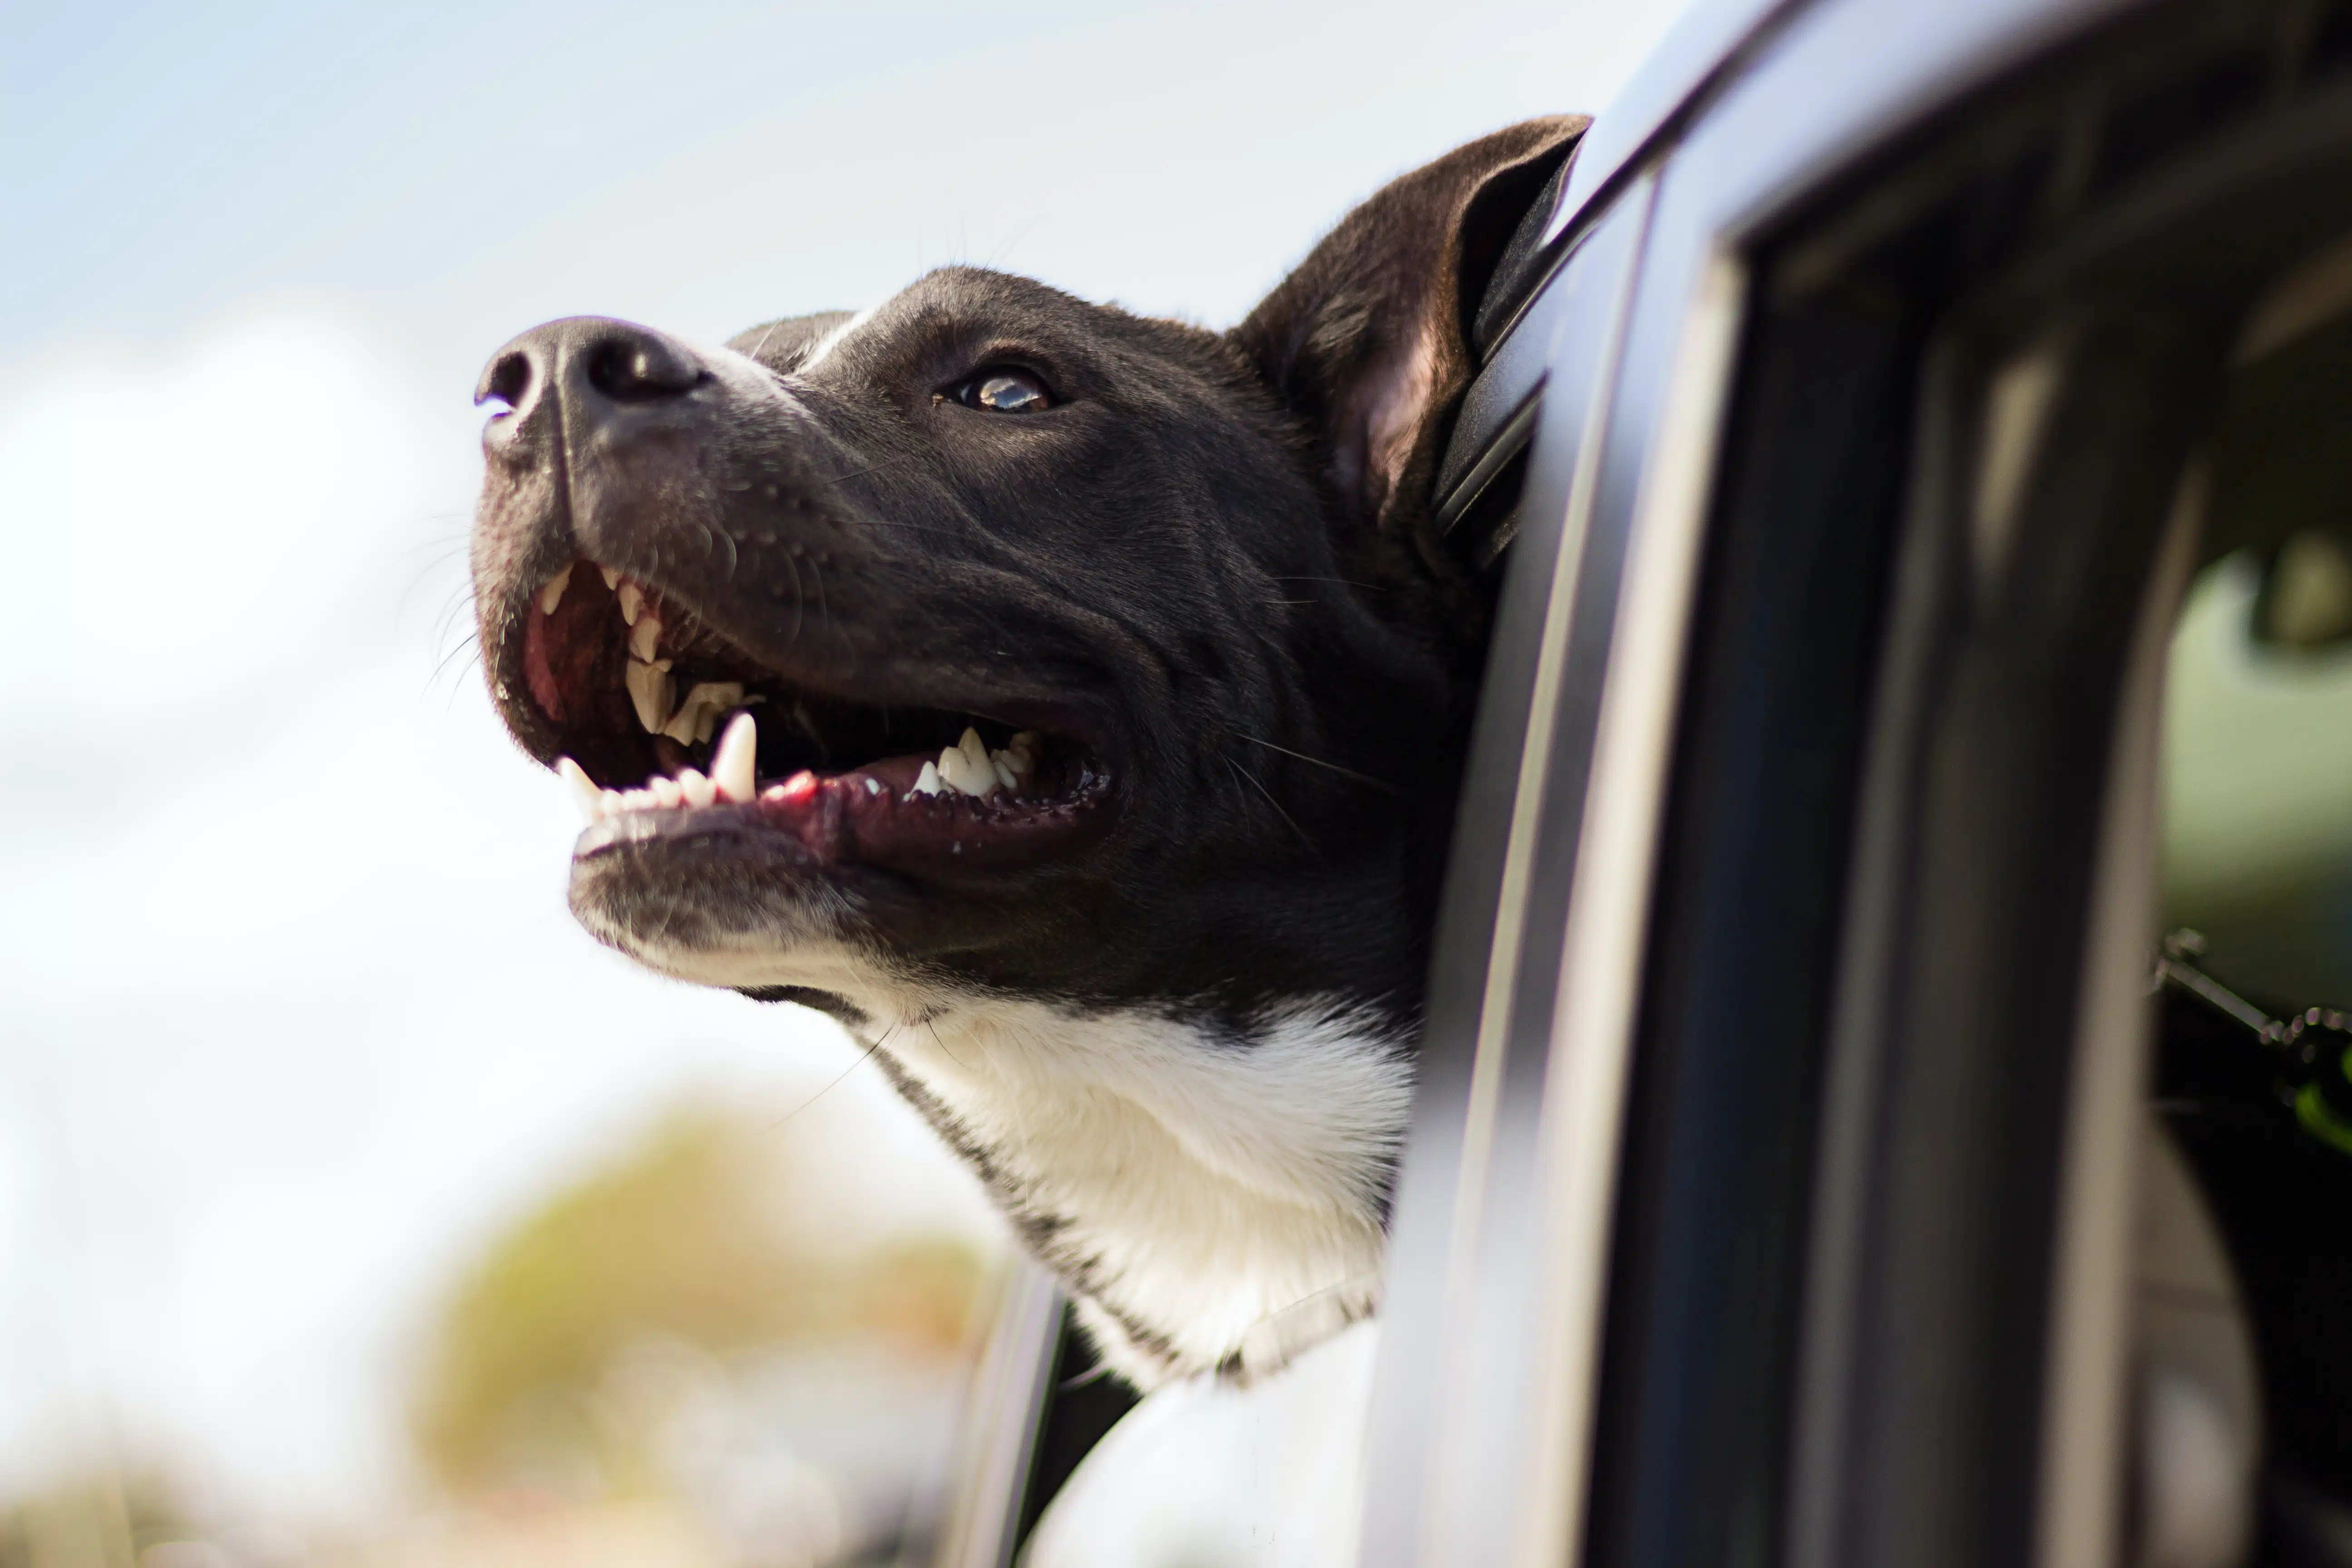 As it sticks its head out the window, this cute black dog shows off its healthy teeth.